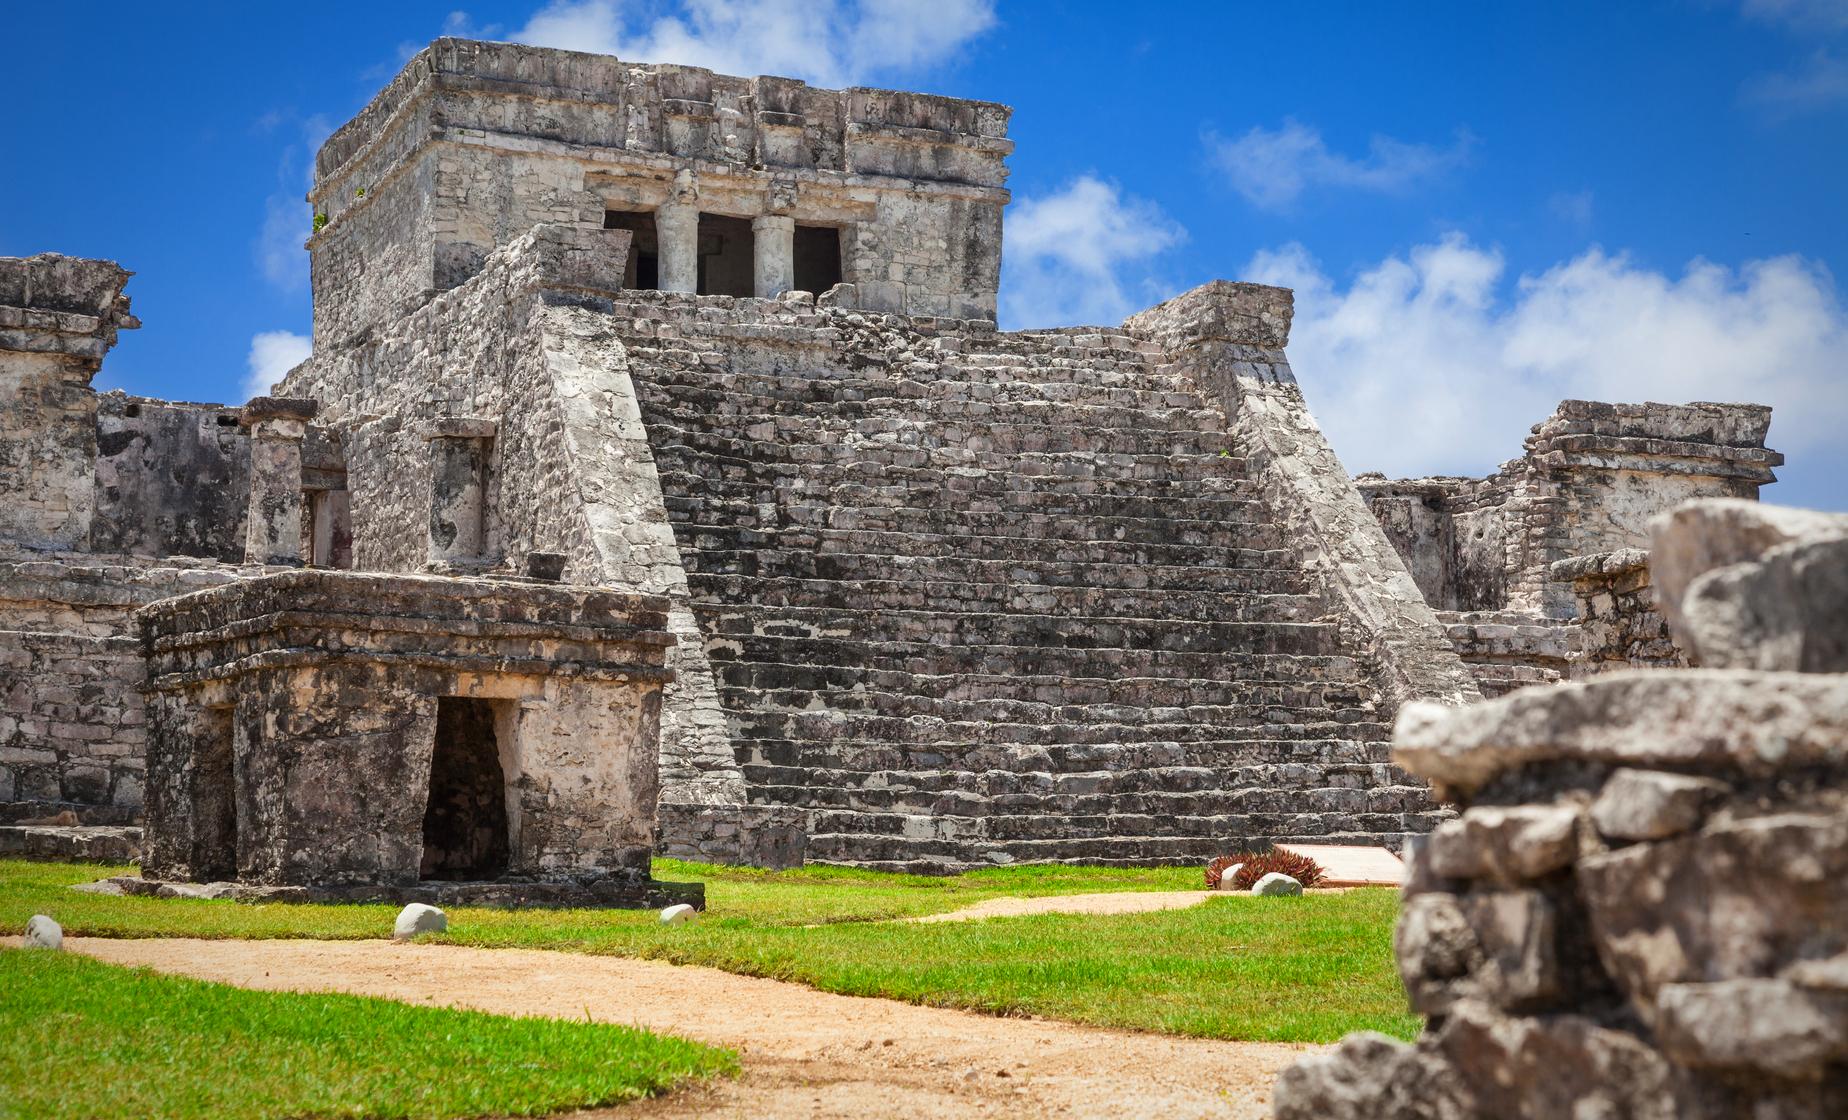 Mayan Ruins of Tulum Day Tour | Book Cozumel Excursions